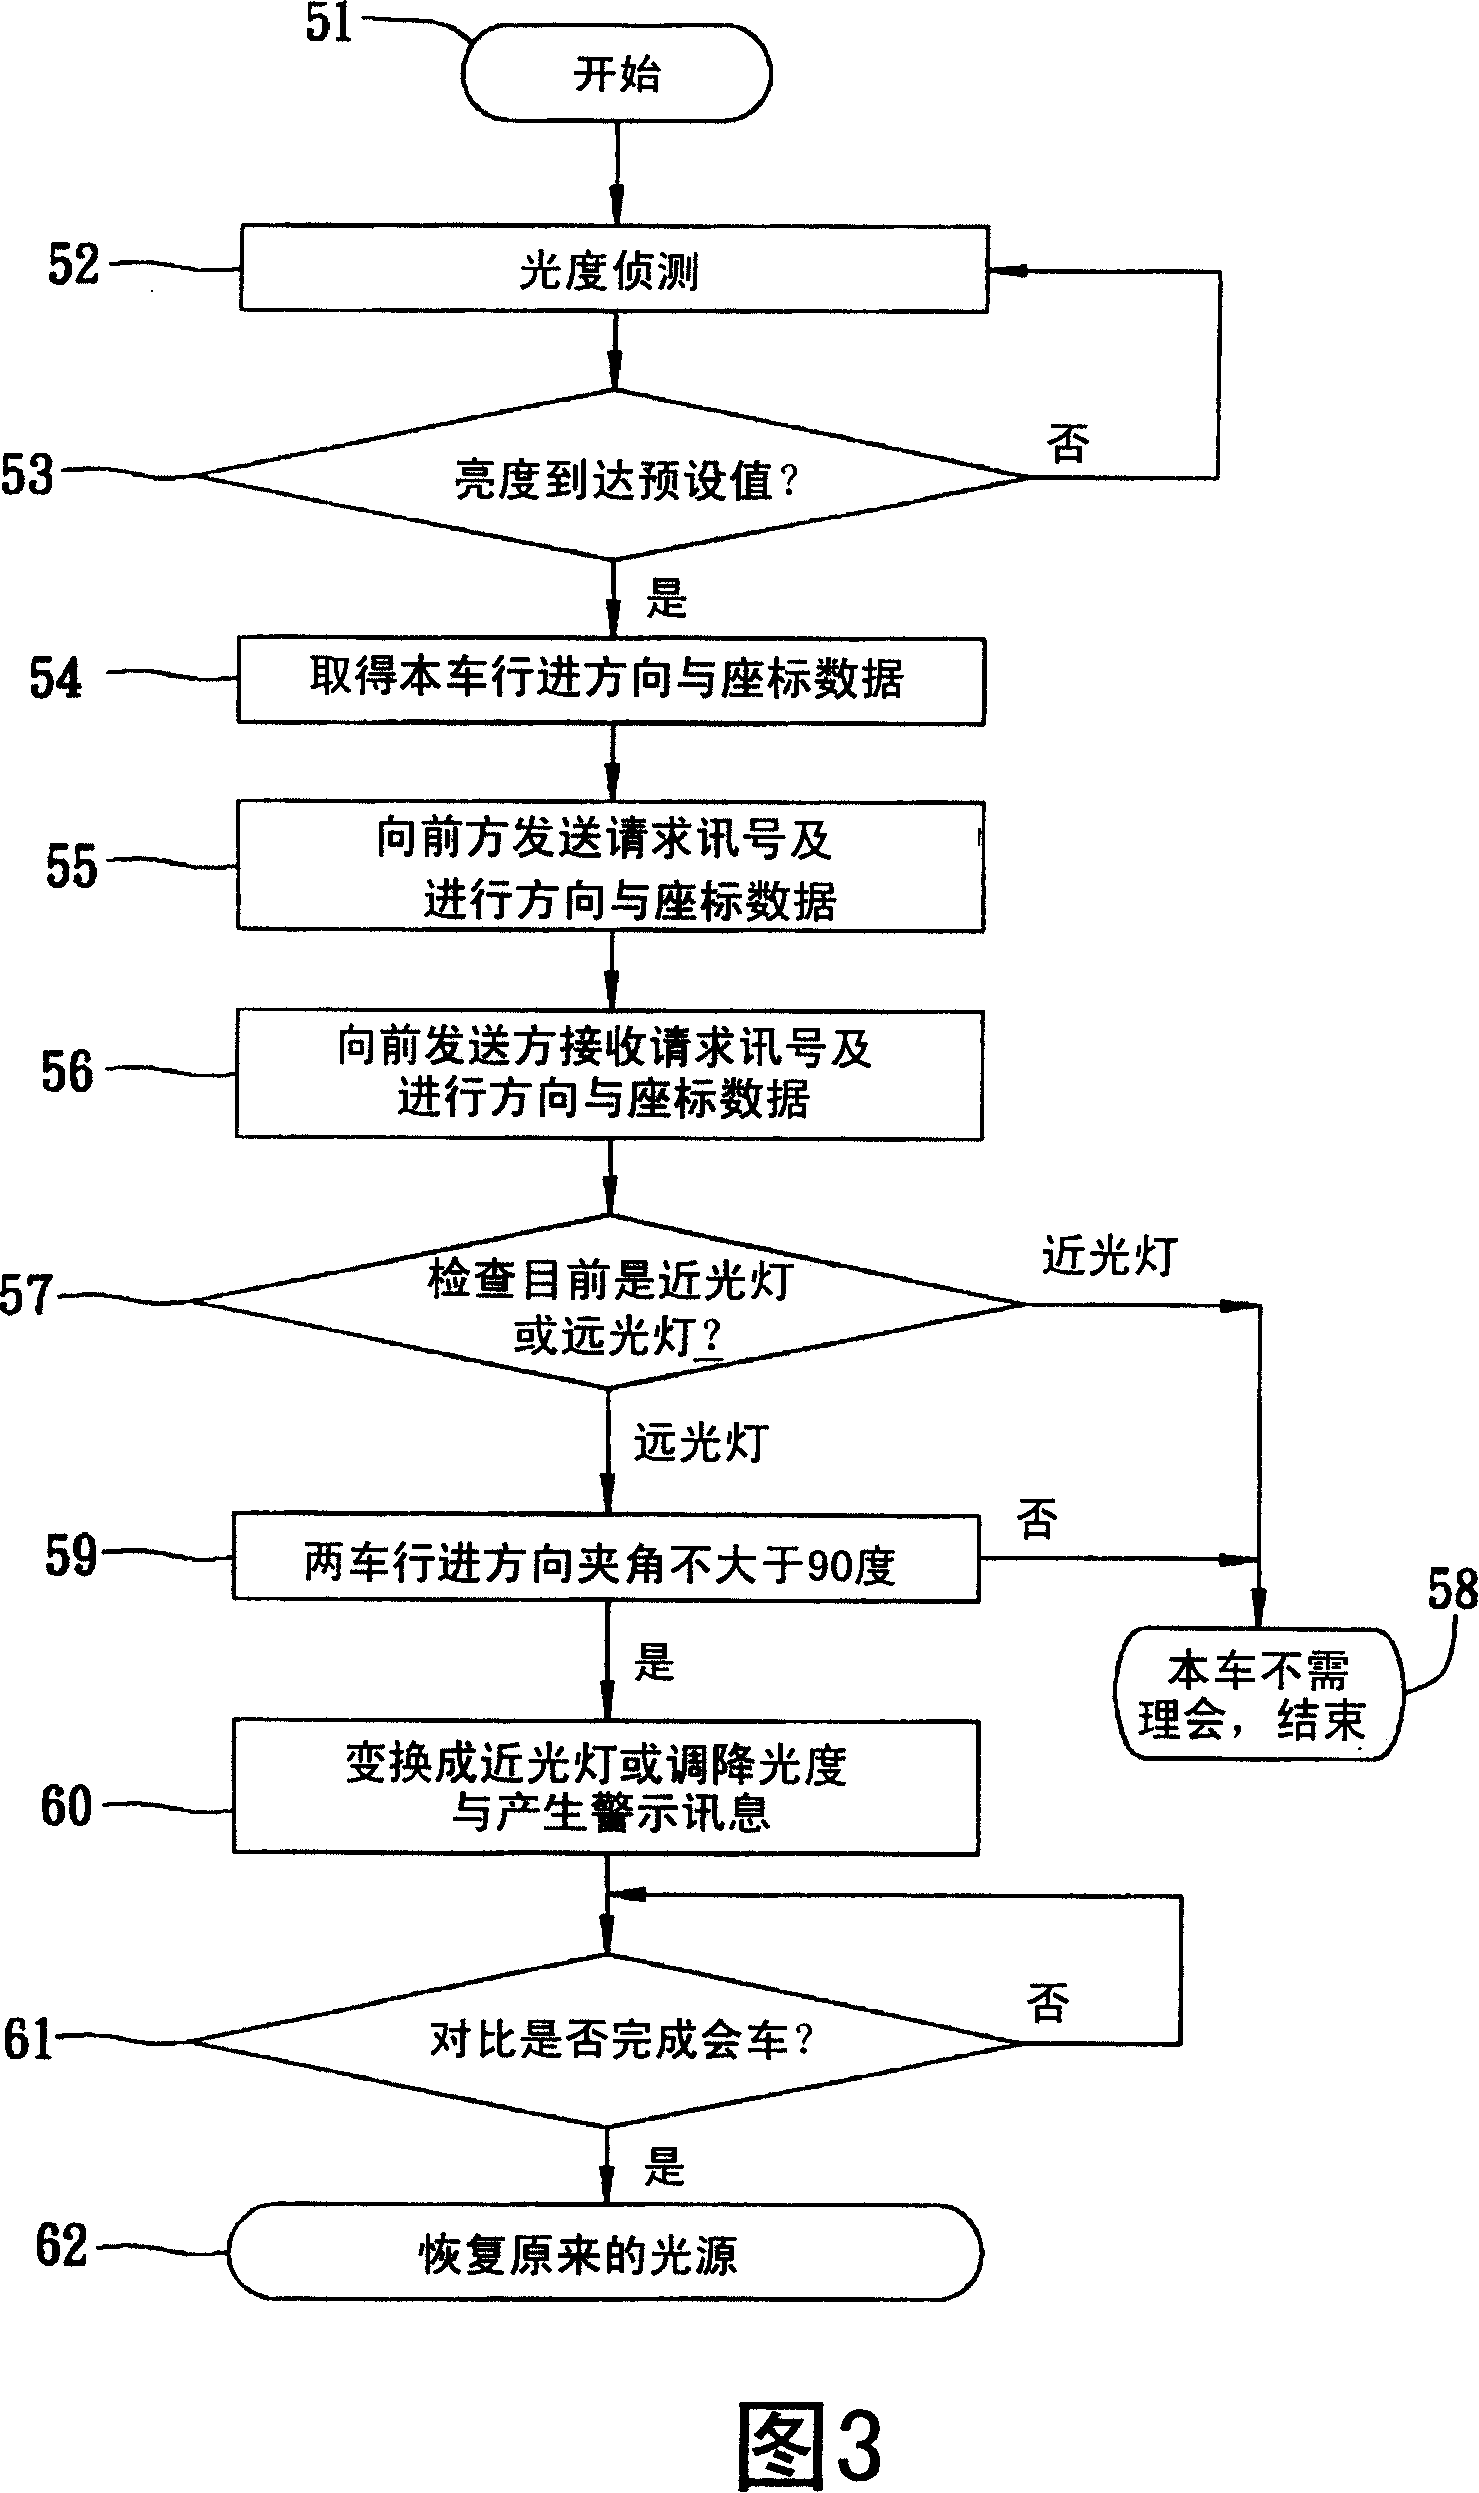 Method and system for light-operation of vehicle